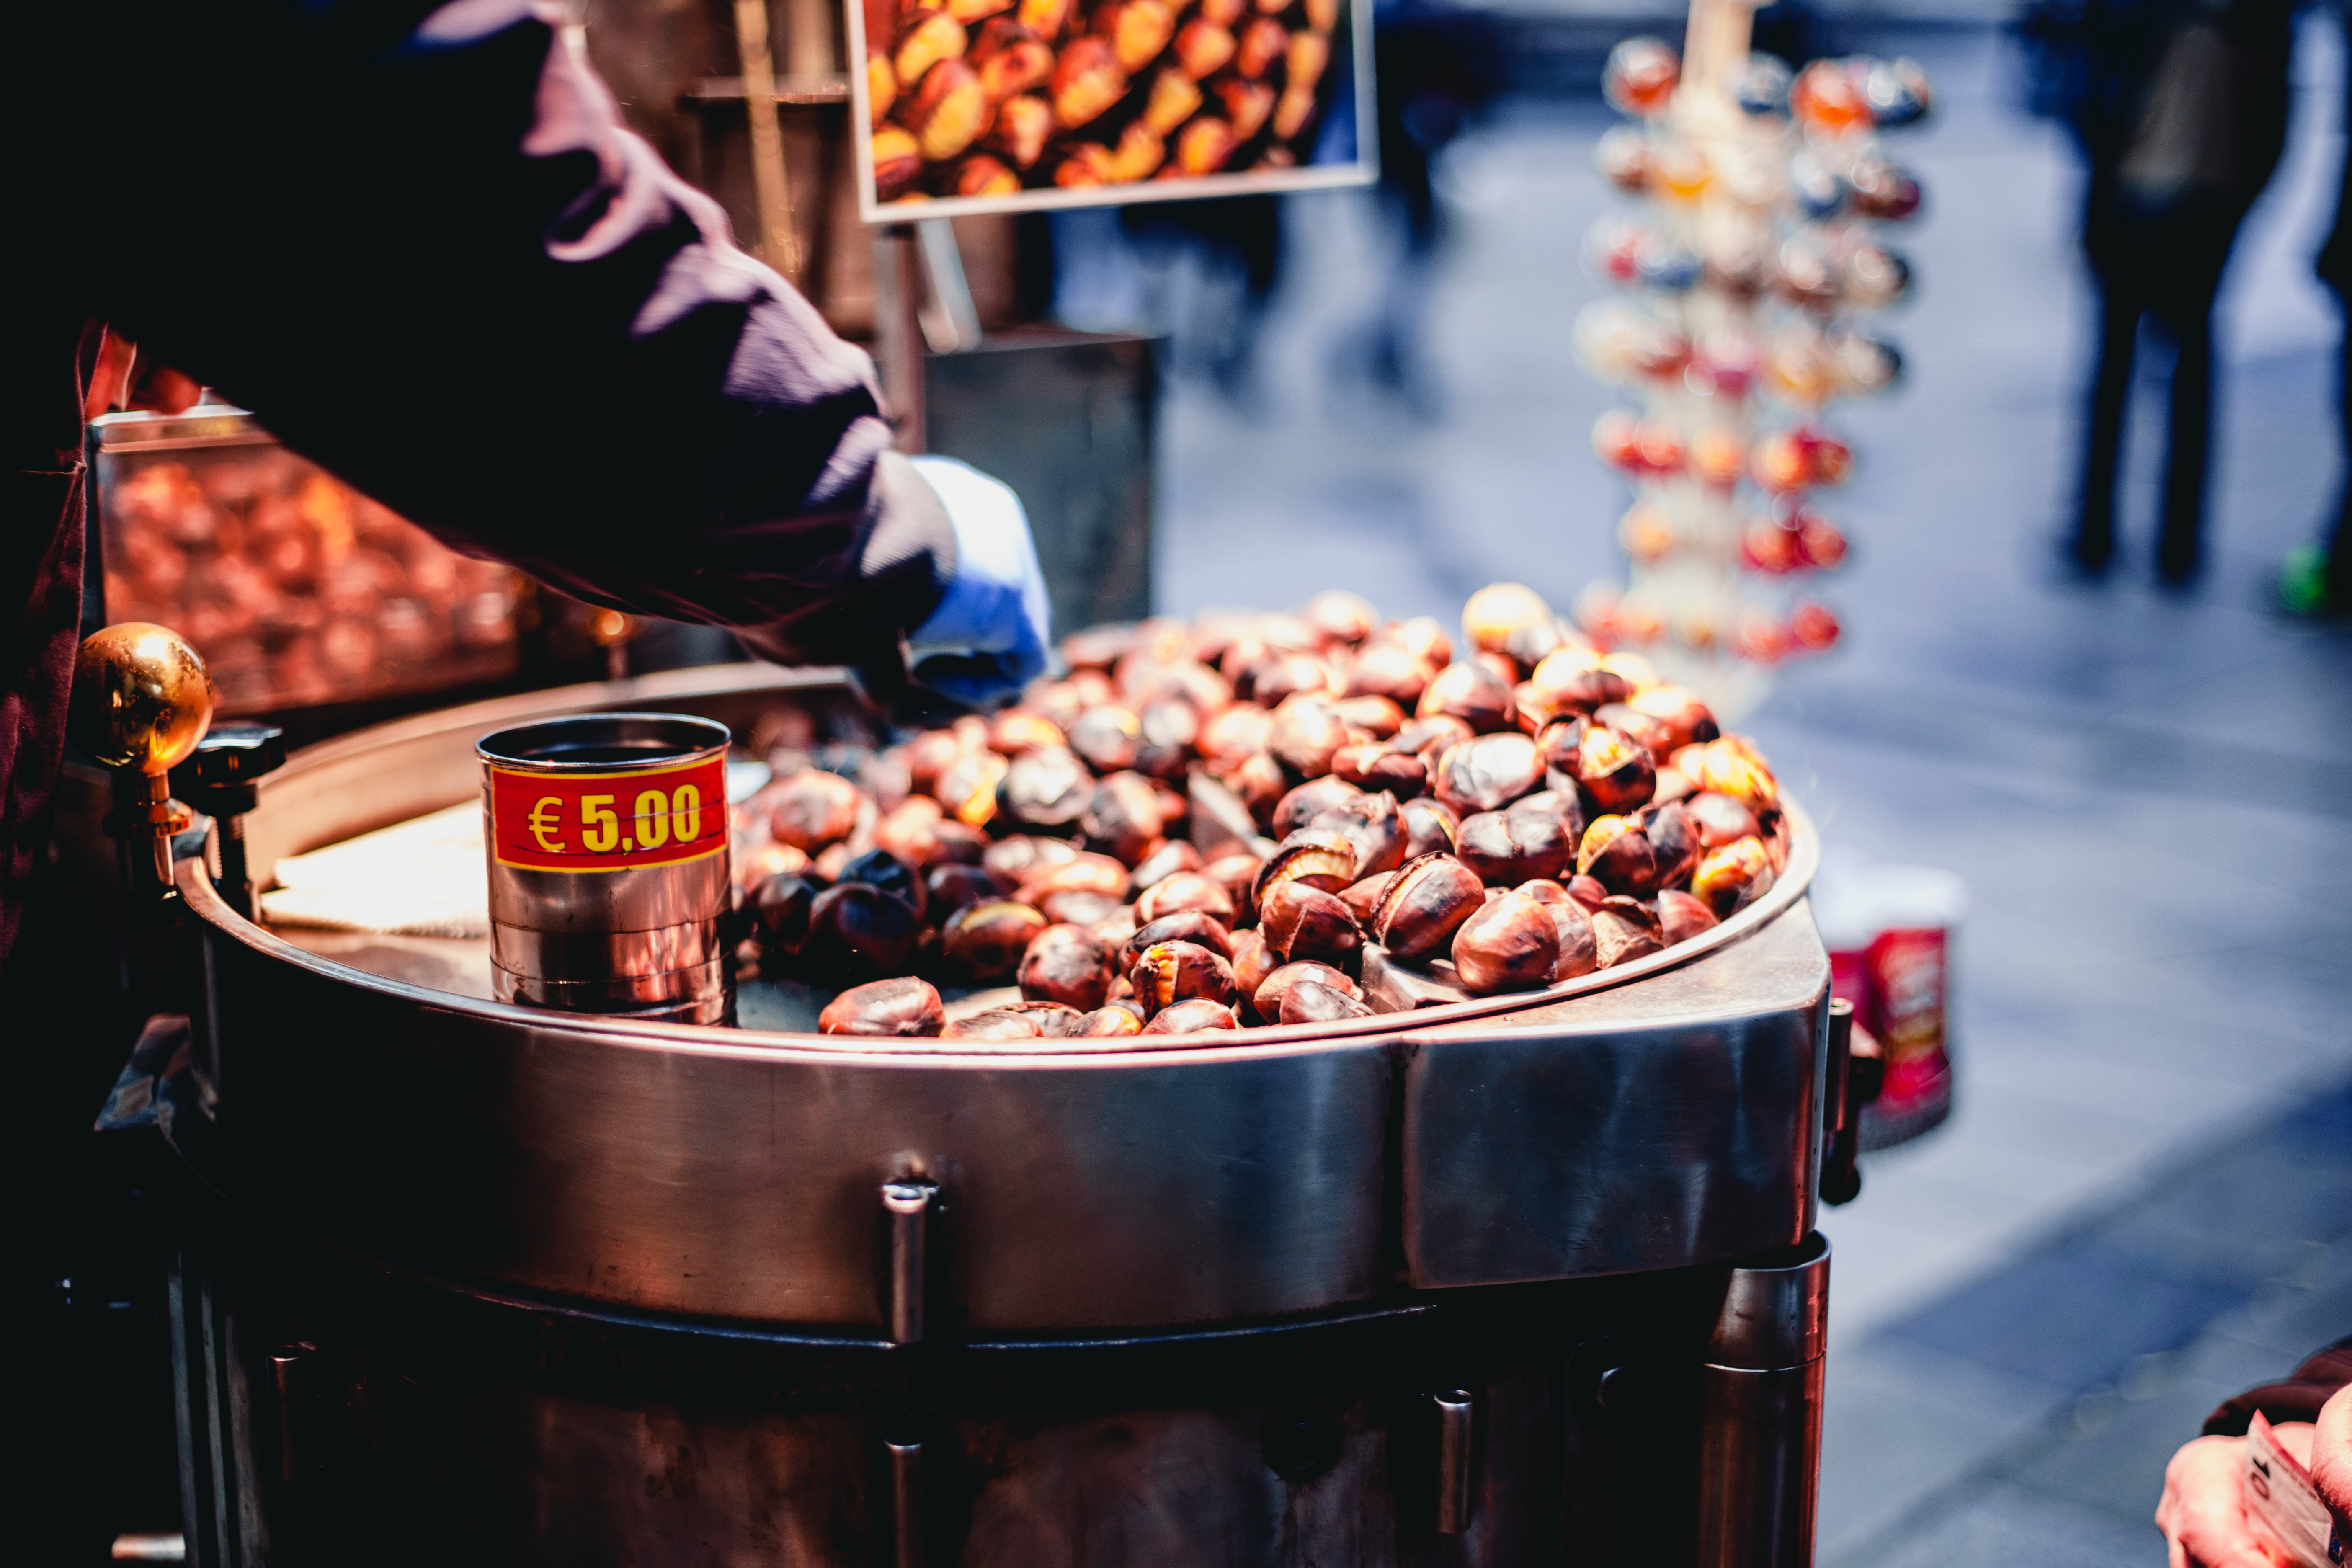 1574733945person-selling-chestnuts-750973.jpg?size=2456811